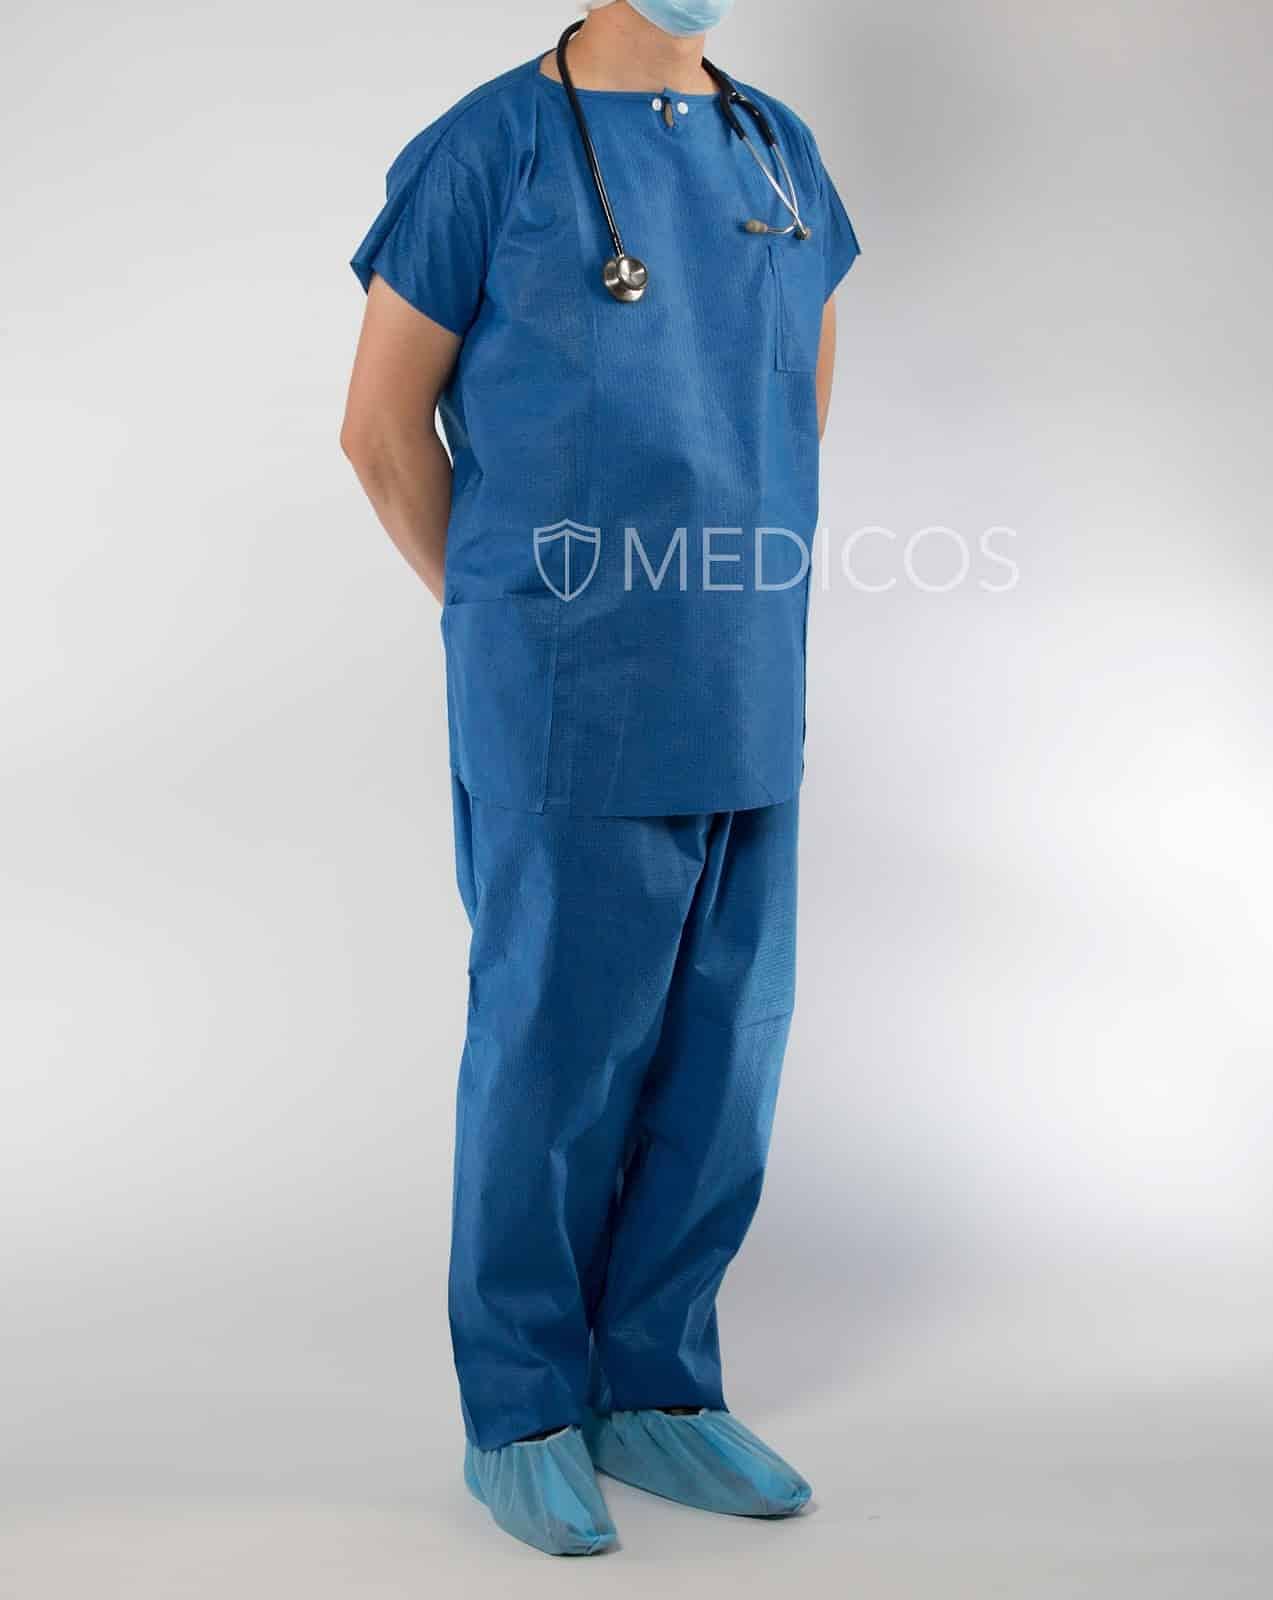 Diasys Operation Theatre Dress - Get Best Price from Manufacturers &  Suppliers in India